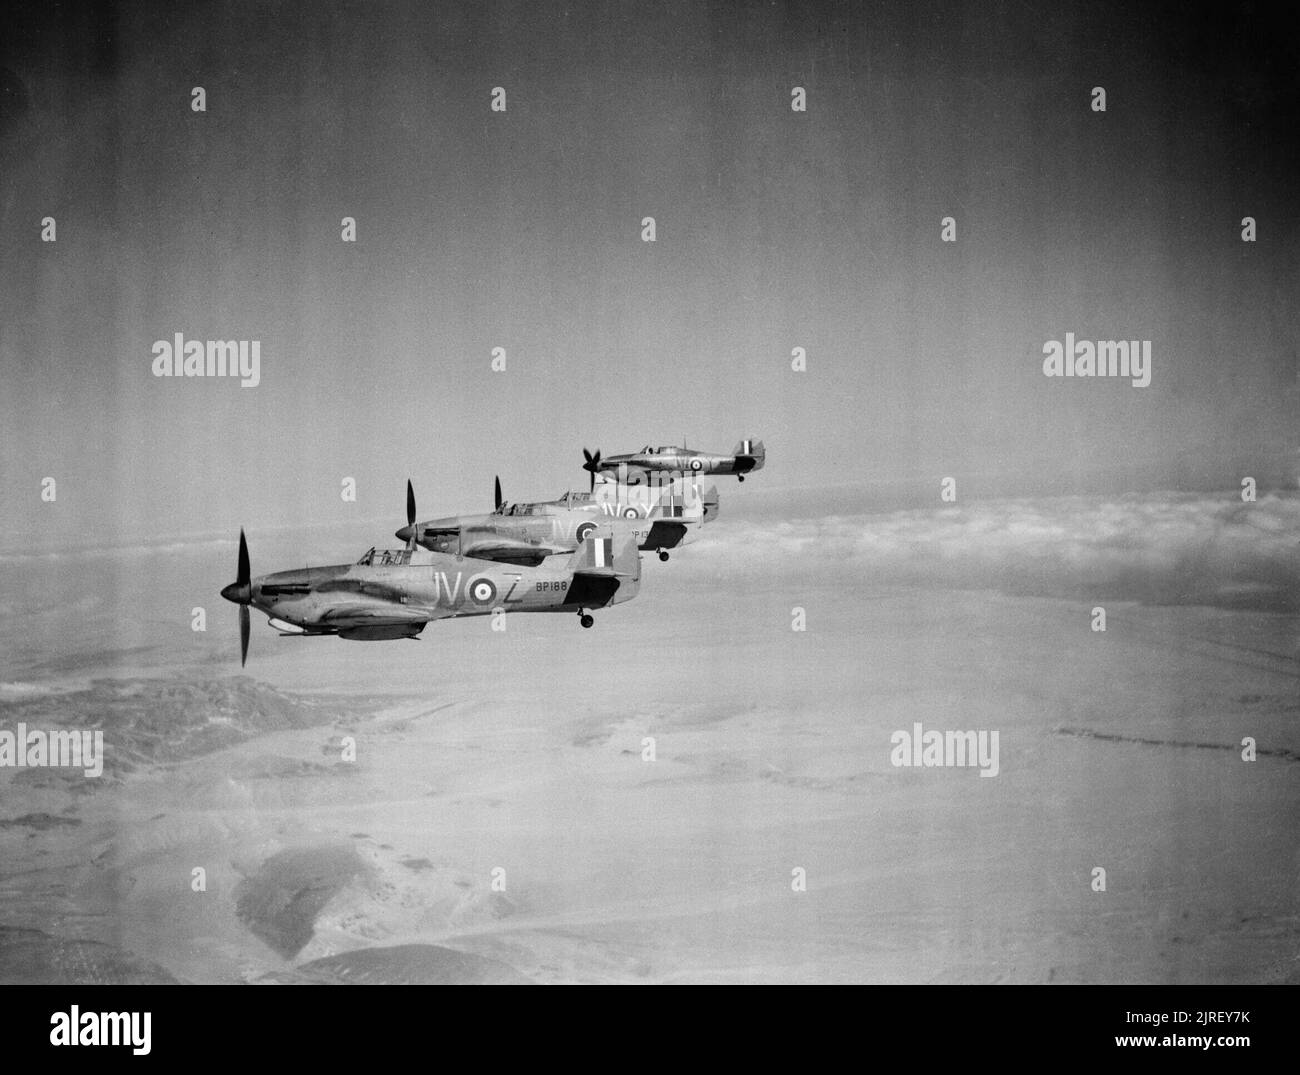 Royal Air Force Operations in the Middle East and North Africa, 1939-1943. Four Hawker Hurricane Mark IIDs (BP188 'JV-C' nearest), of No. 6 Squadron RAF based at Shandur, Egypt, flying in starboard echelon formation over the Western Desert. Stock Photo